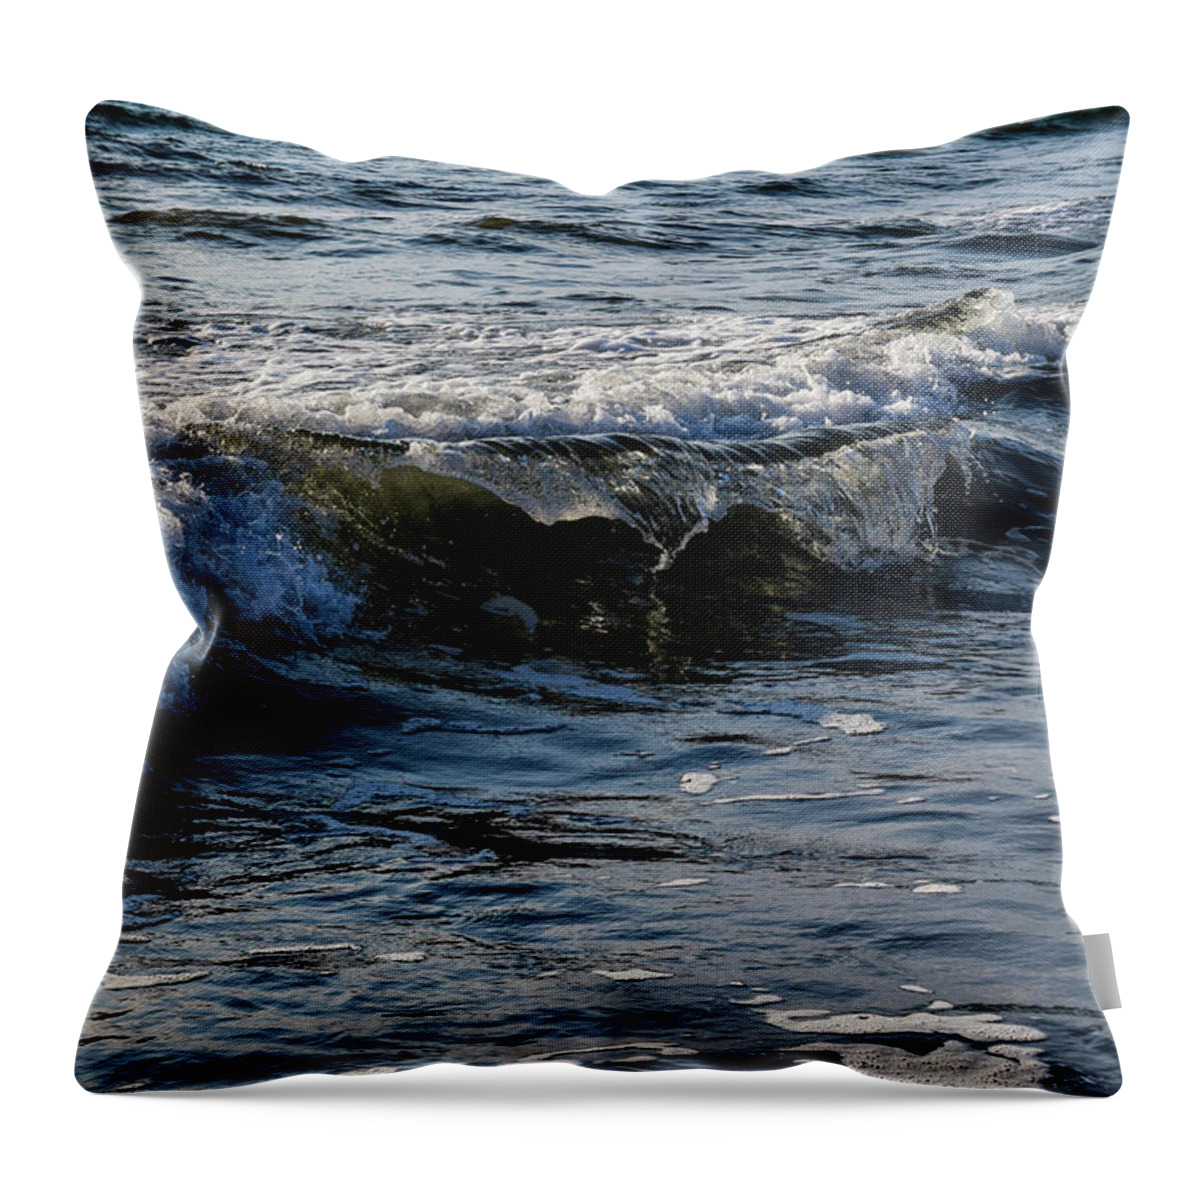 Waves Throw Pillow featuring the photograph Pacific Waves by Nicole Lloyd